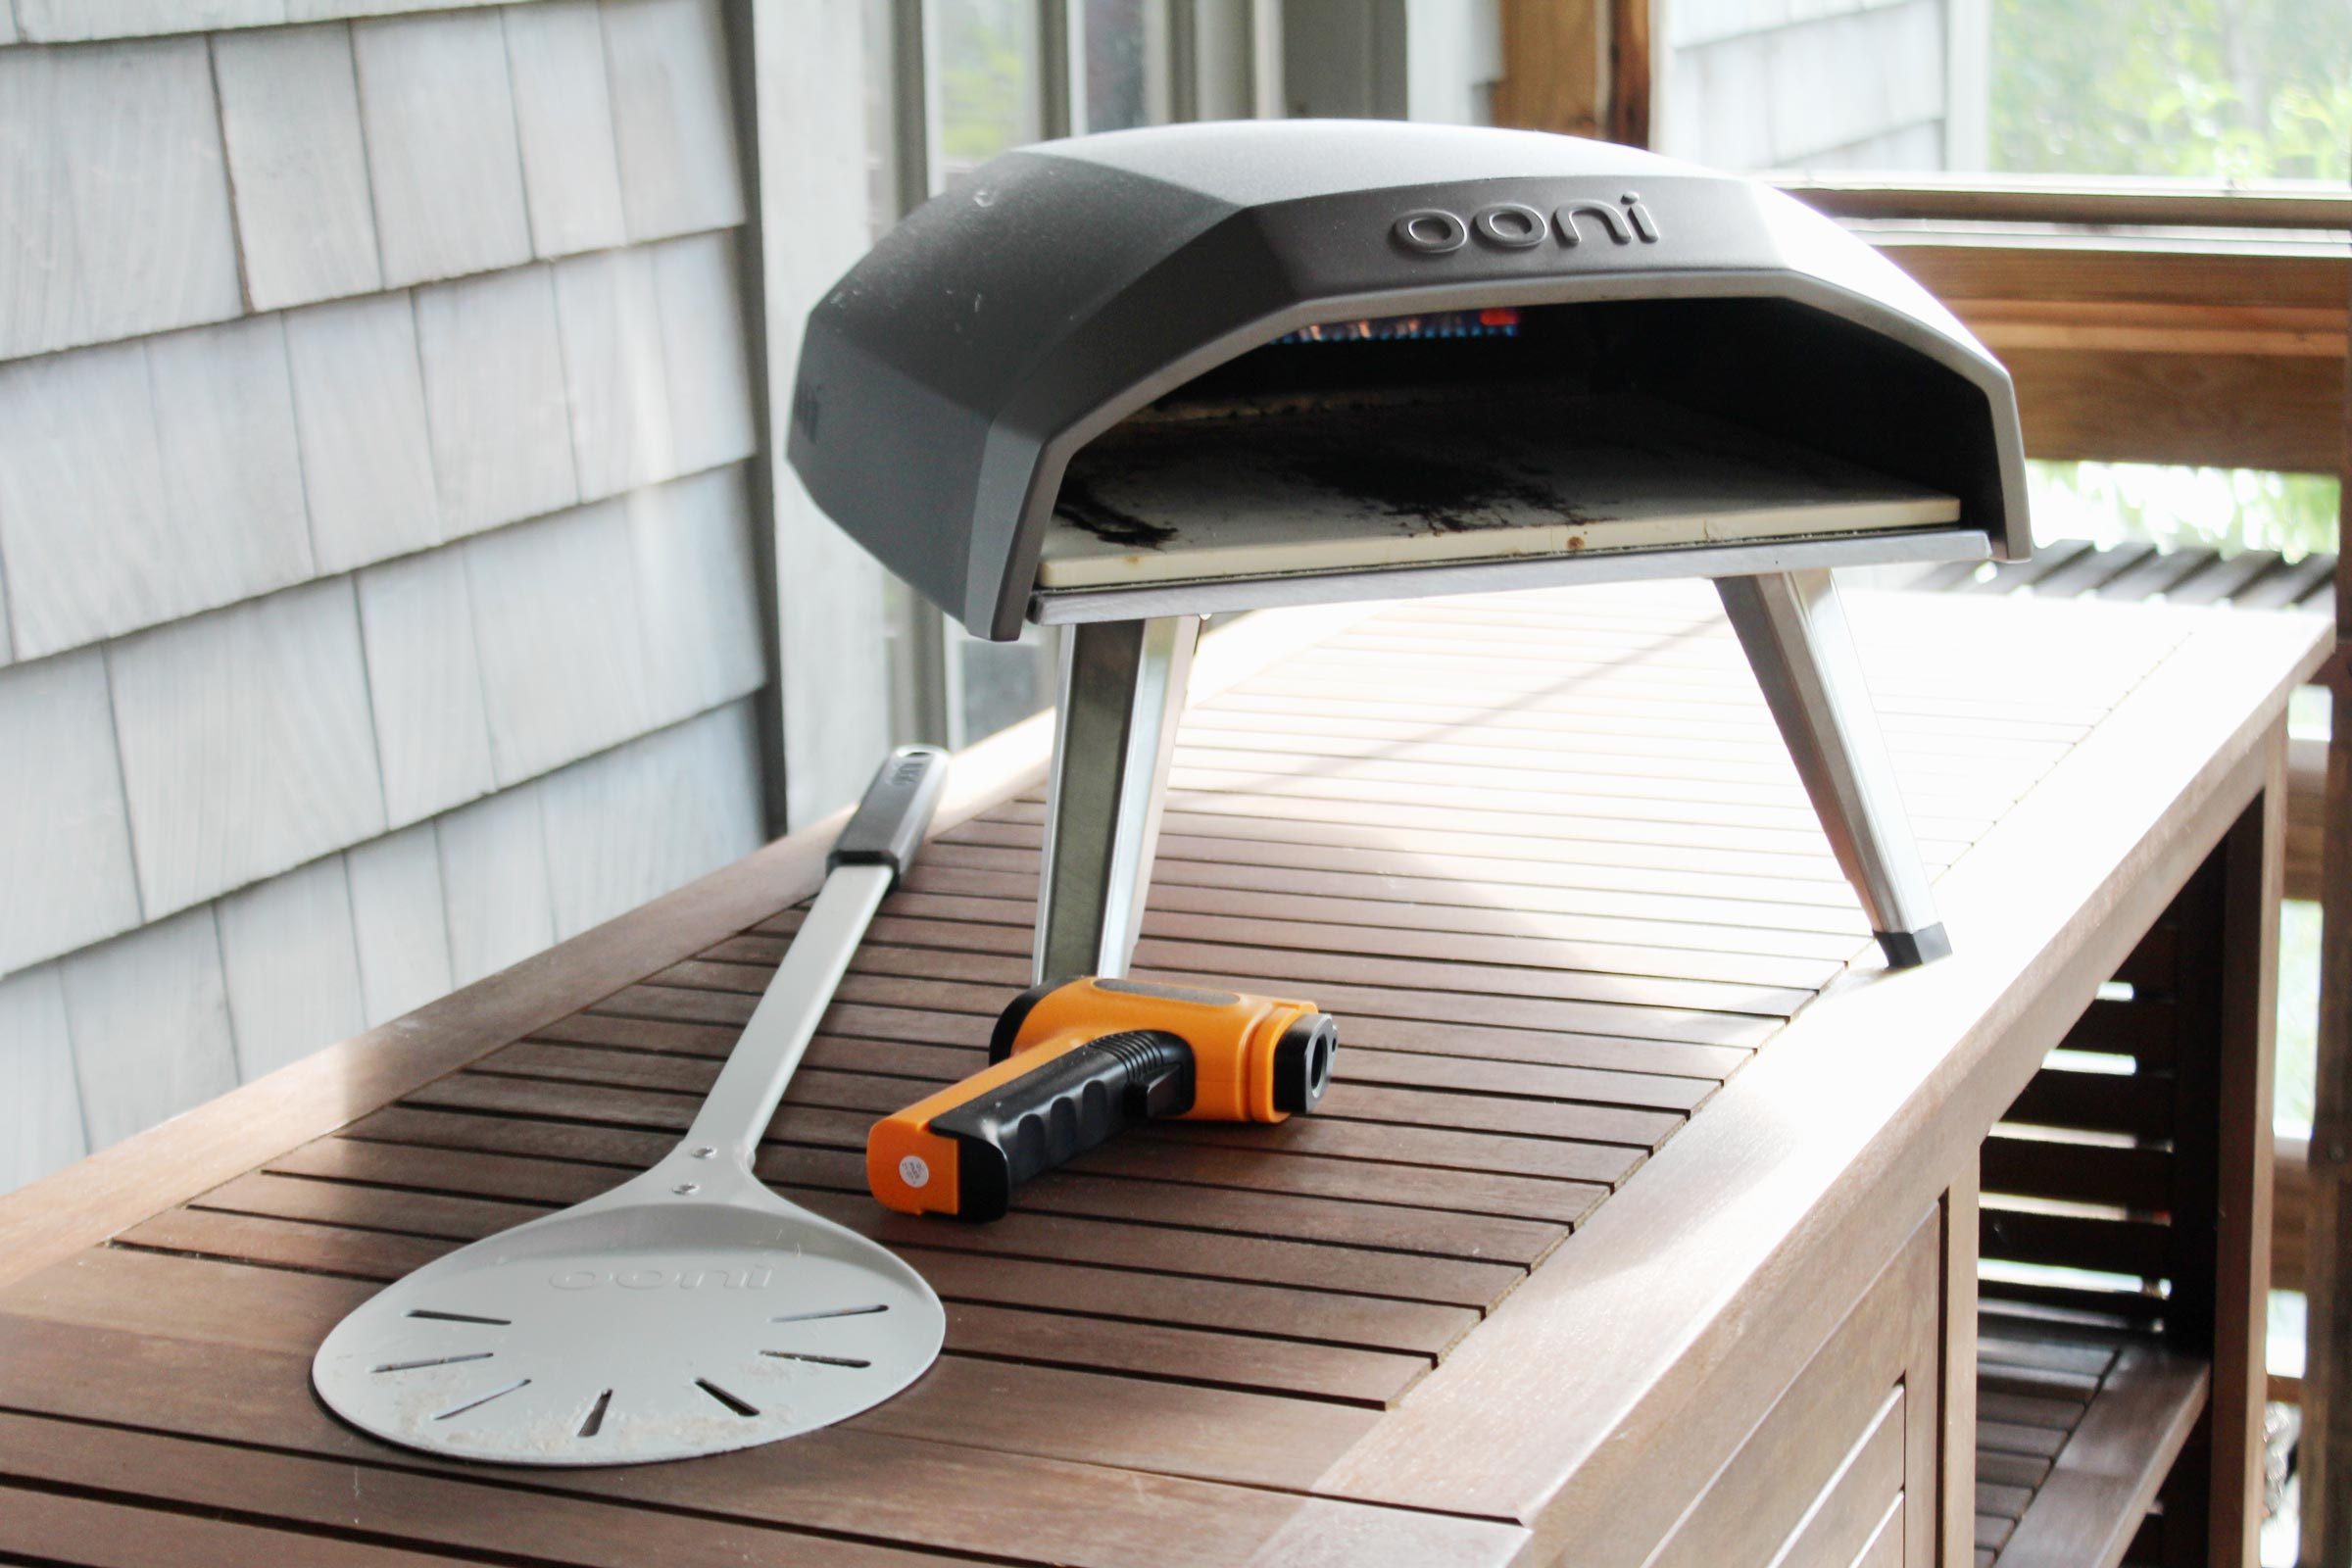 Oonie pizza oven with a pizza peel and thermometer outside on a table